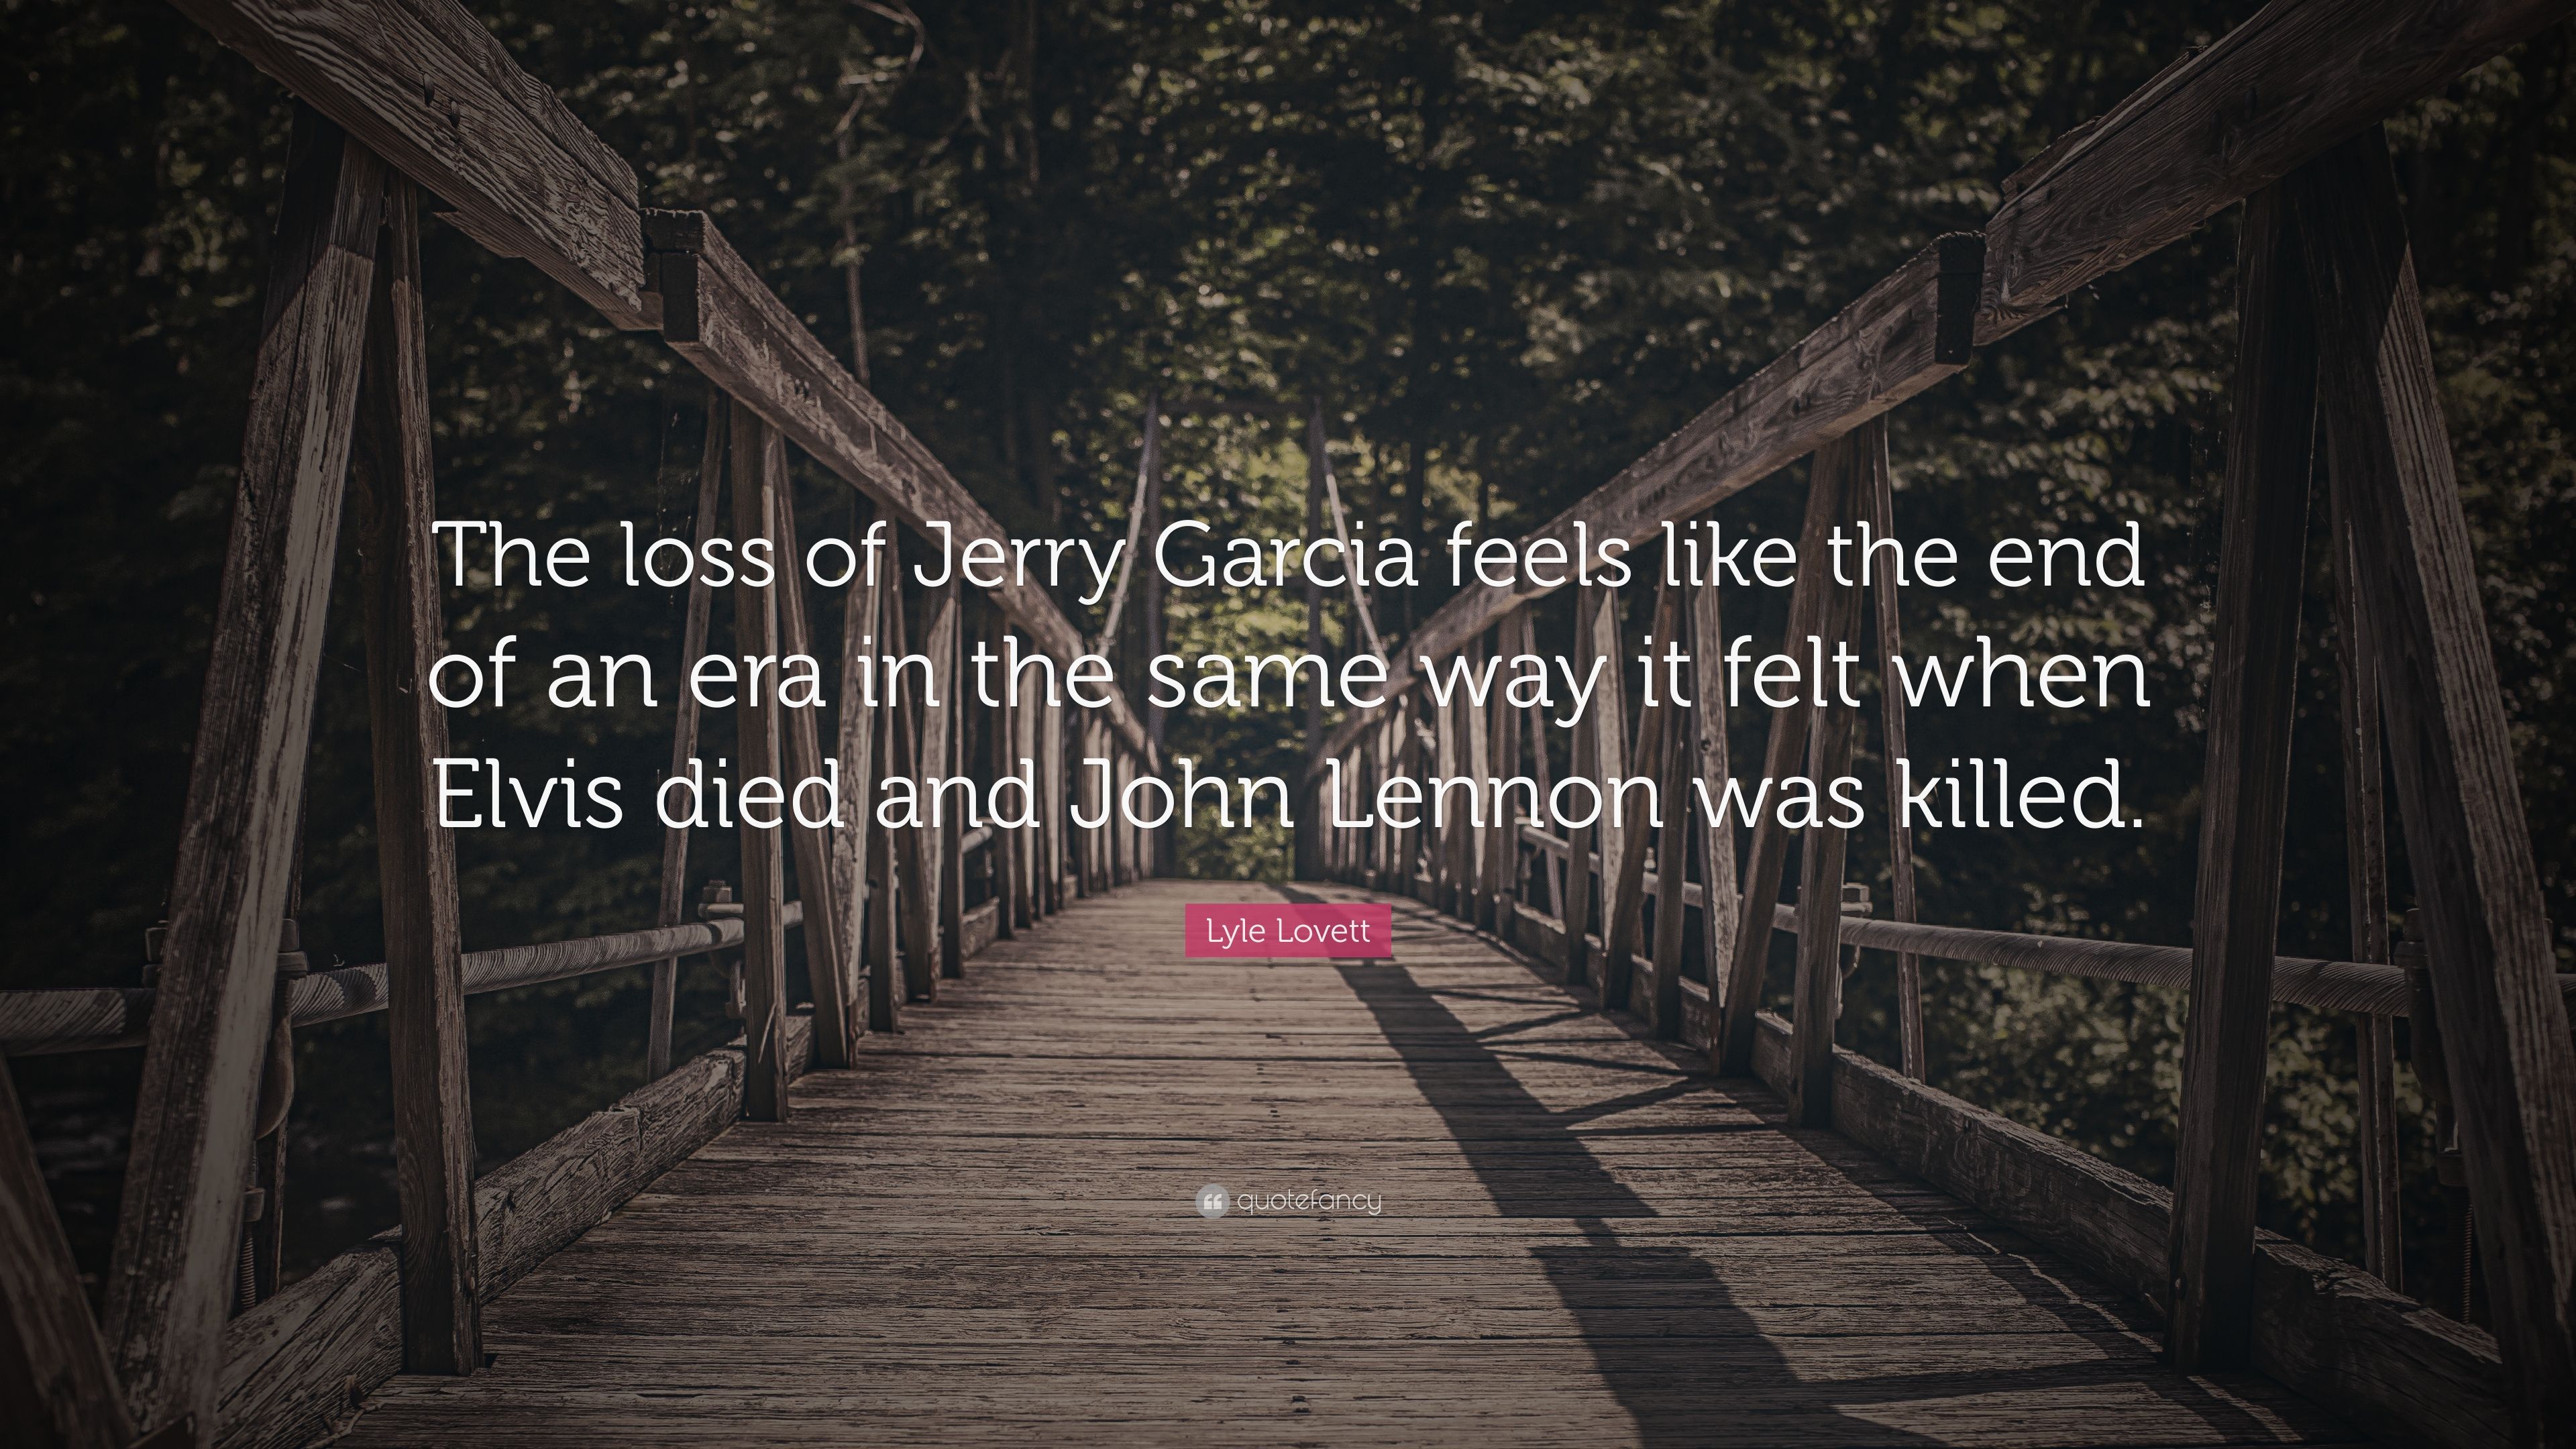 Lyle Lovett Quote: “The loss of Jerry Garcia feels like